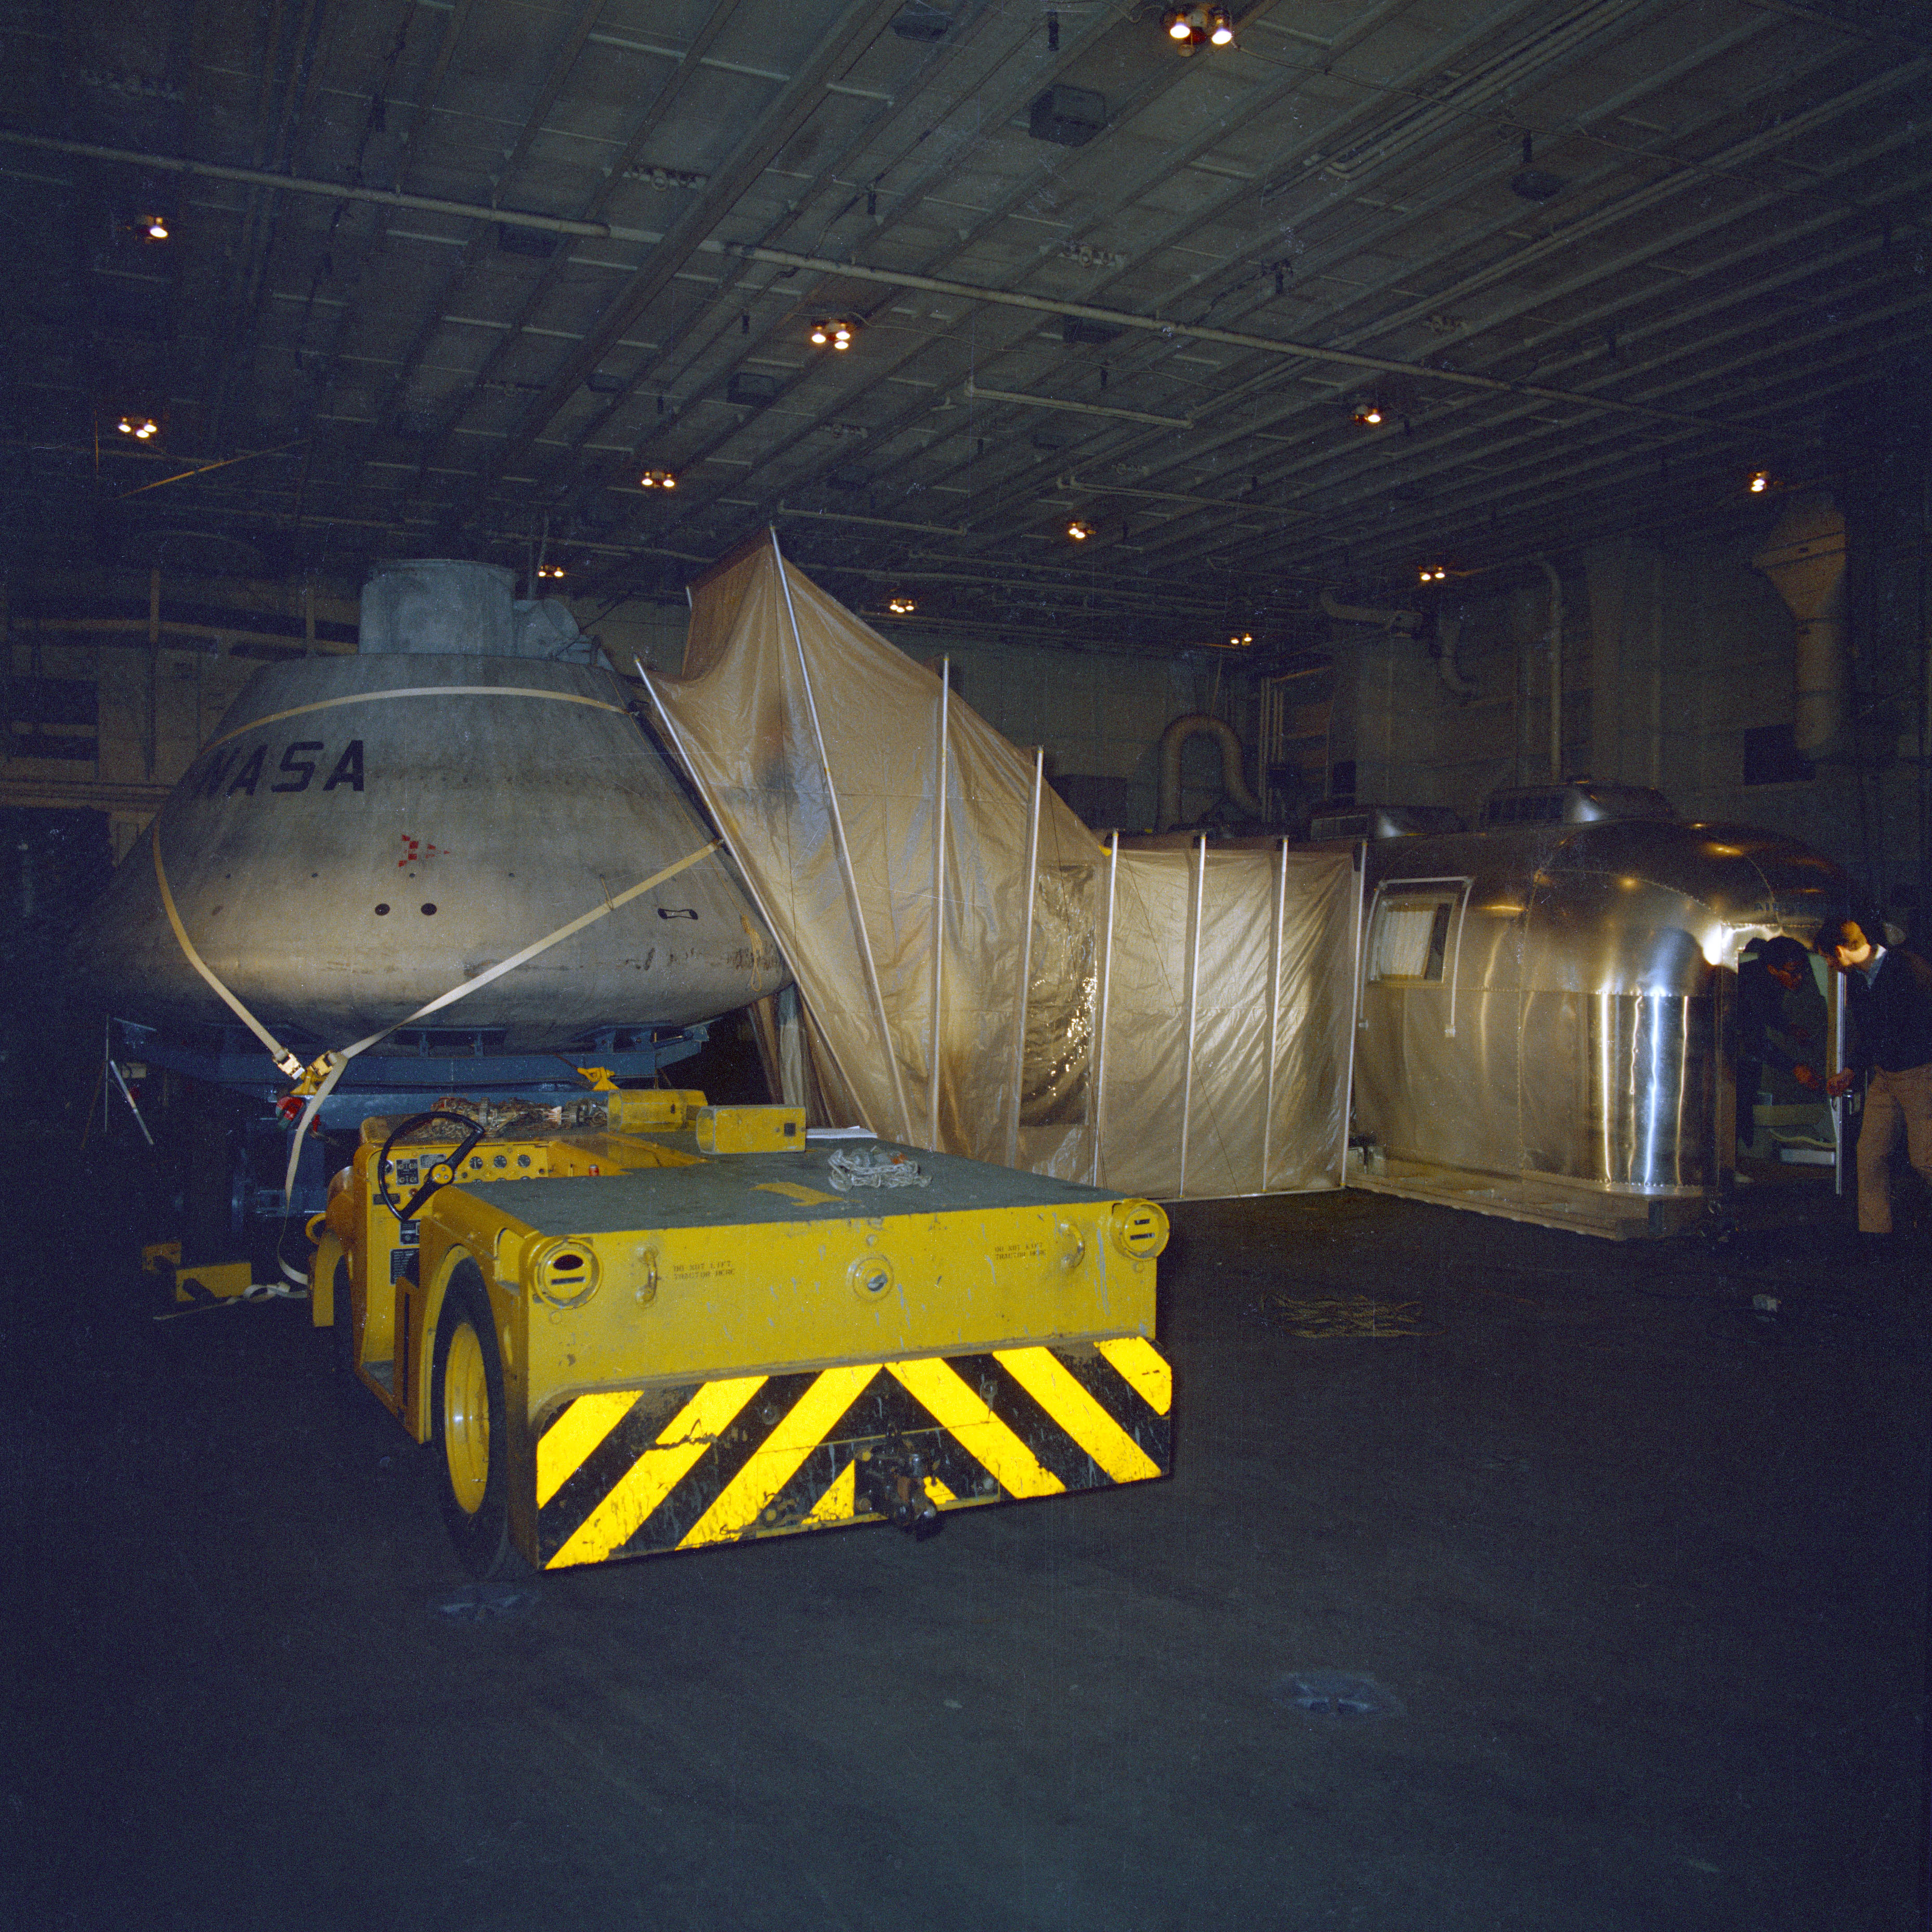 The flexible tunnel set up between the MQF and a mockup Command Module